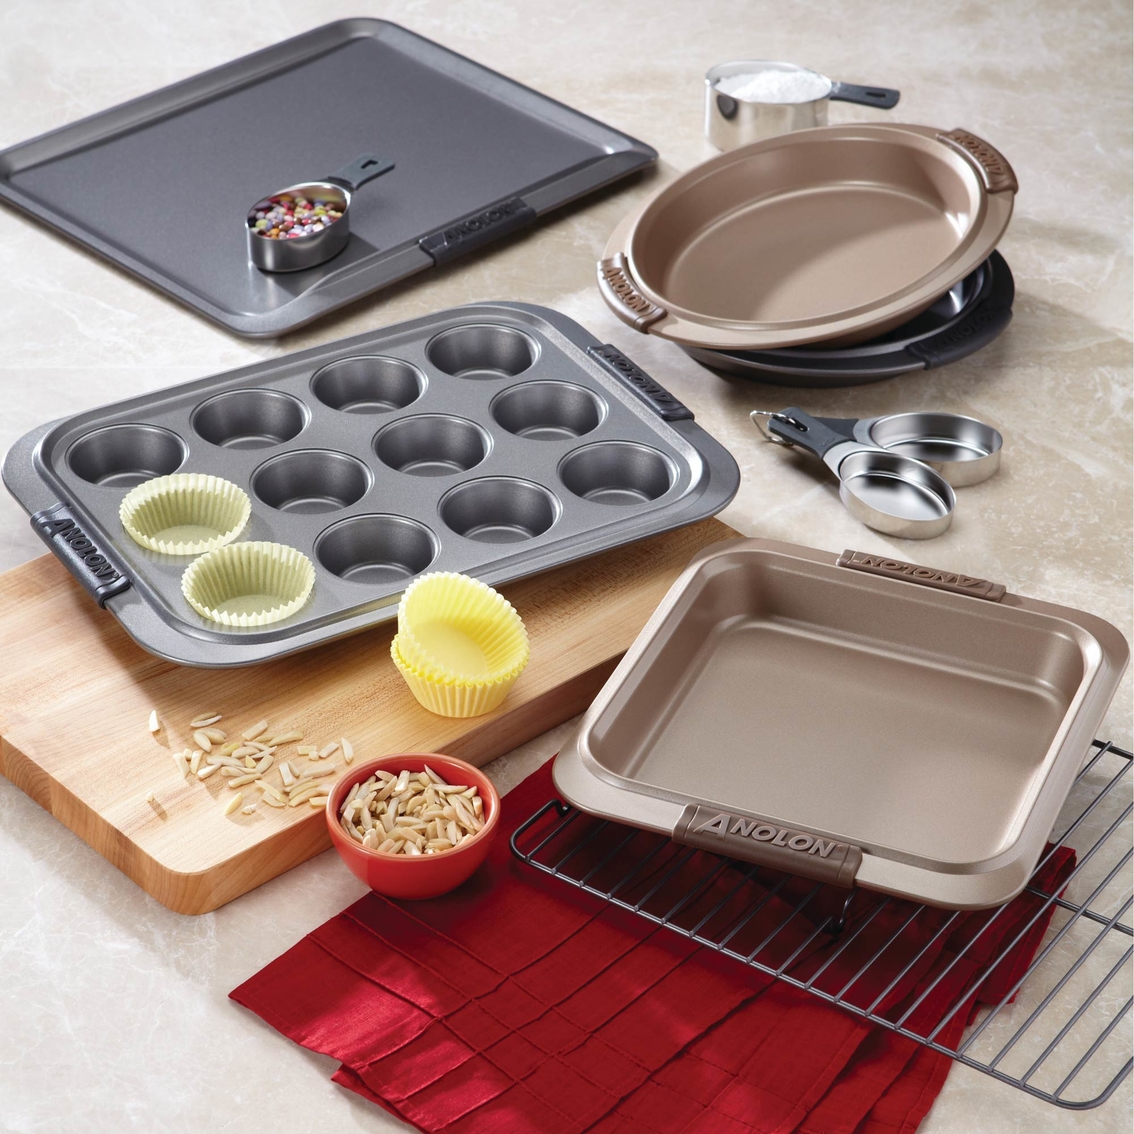 Anolon Advanced Nonstick Bakeware Silicone Grips Cookie Sheet - Image 3 of 3